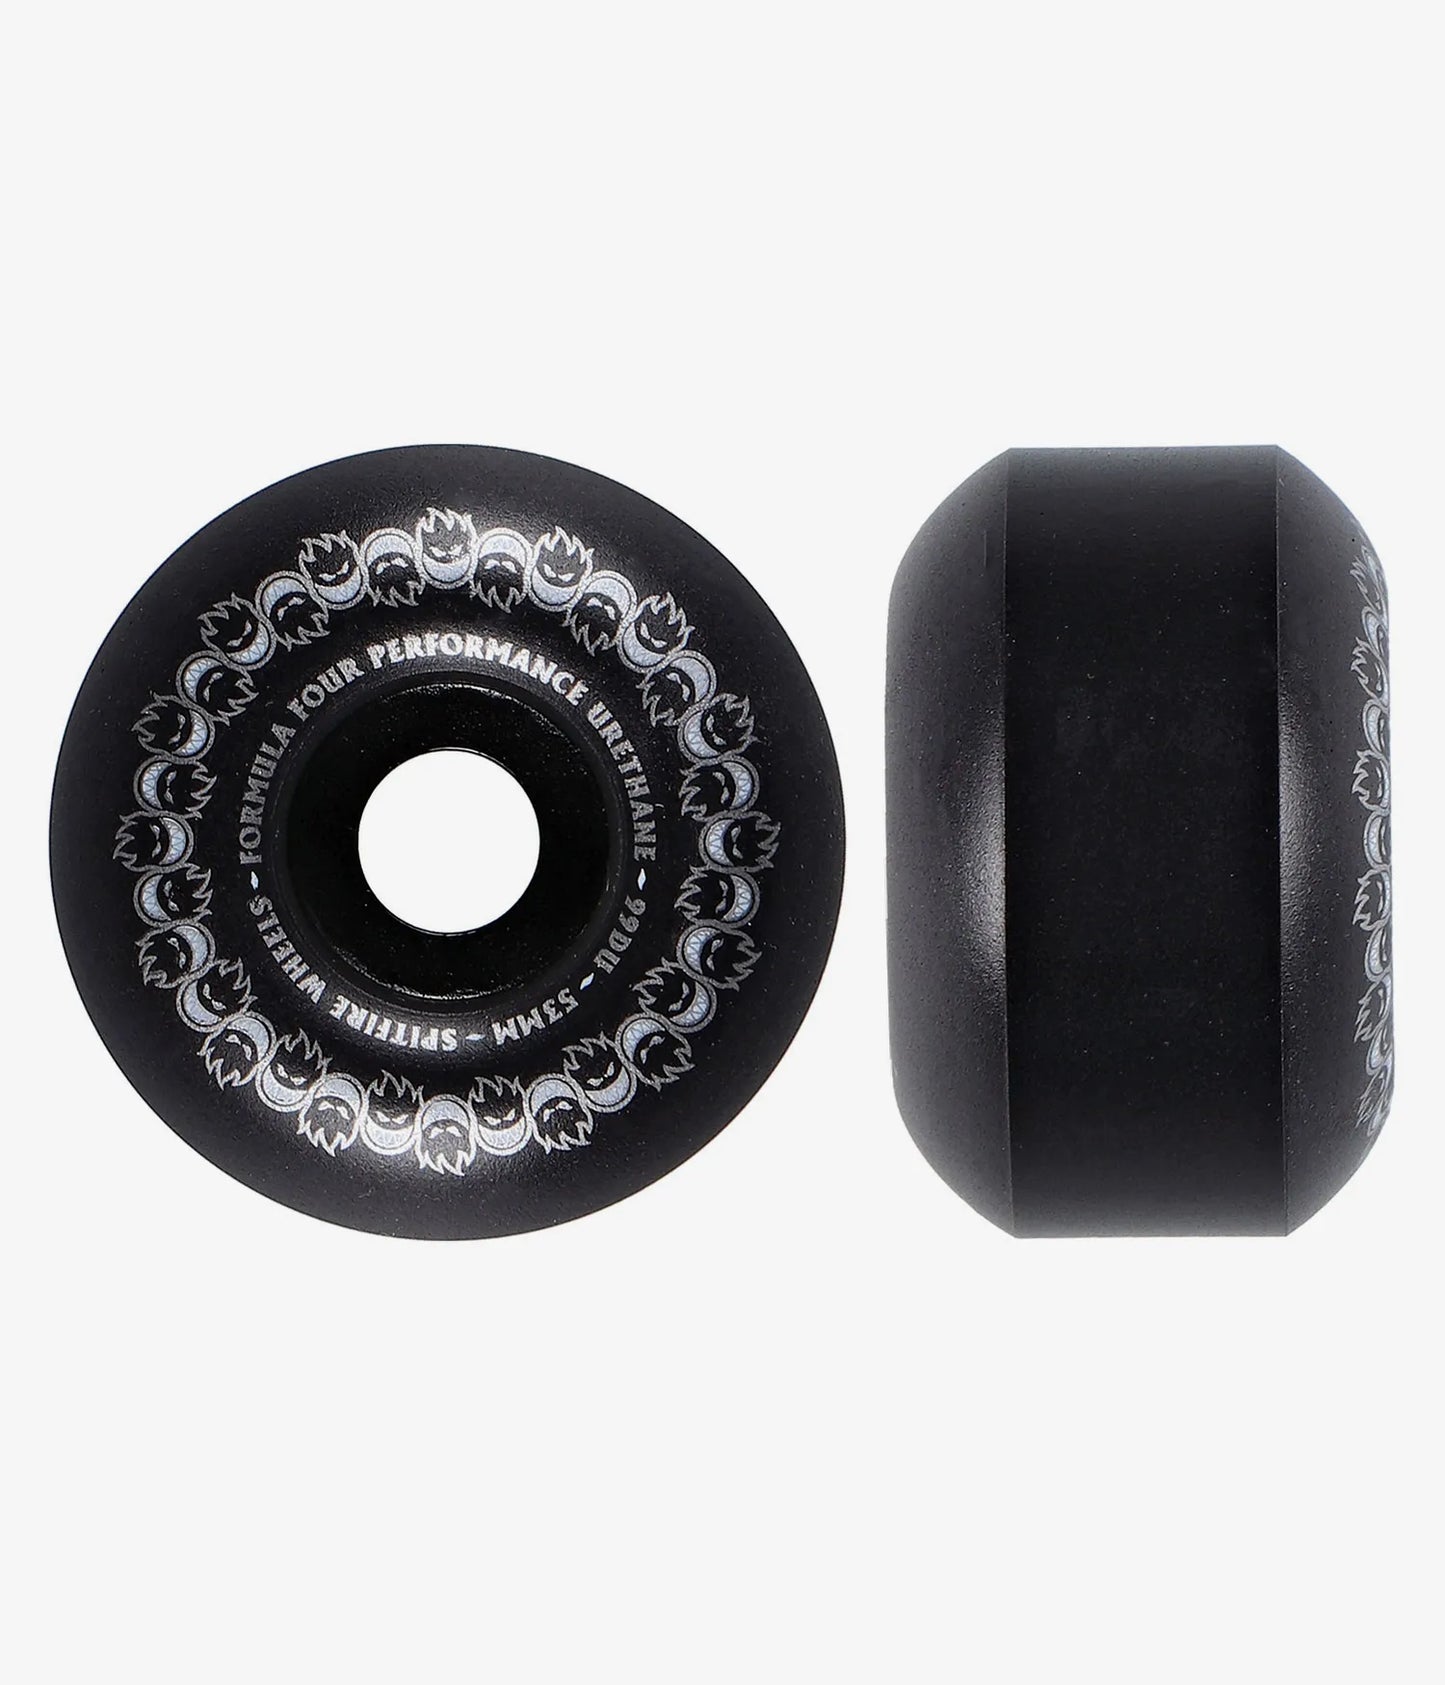 SPITFIRE - FORMULA FOUR REPEATERS - BLACK - 99 DURO - 53MM